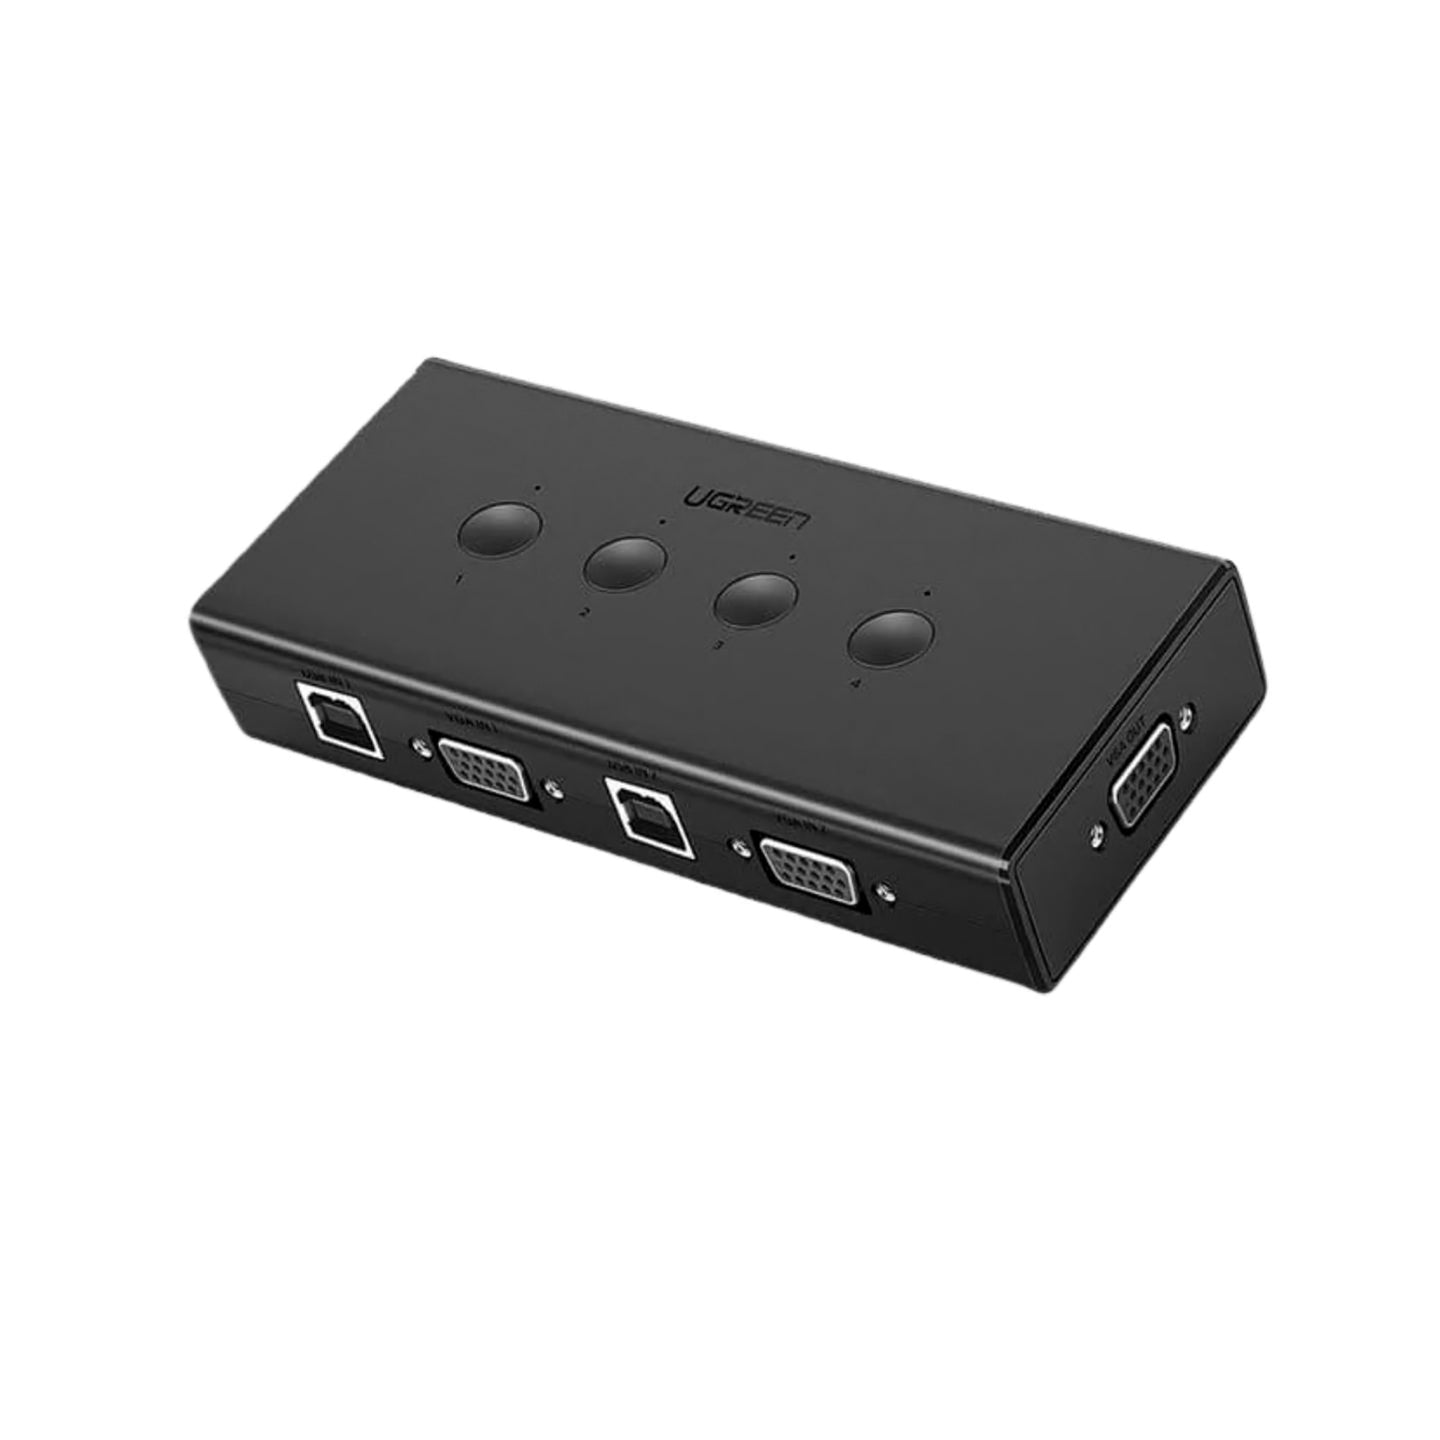 UGREEN 1080P 60Hz 4-in-1 USB KVM VGA Switch Box Video Sharing Adapter with 3 USB 2.0 Ports, Push Button Switch, Supports RGB Channel | 50280